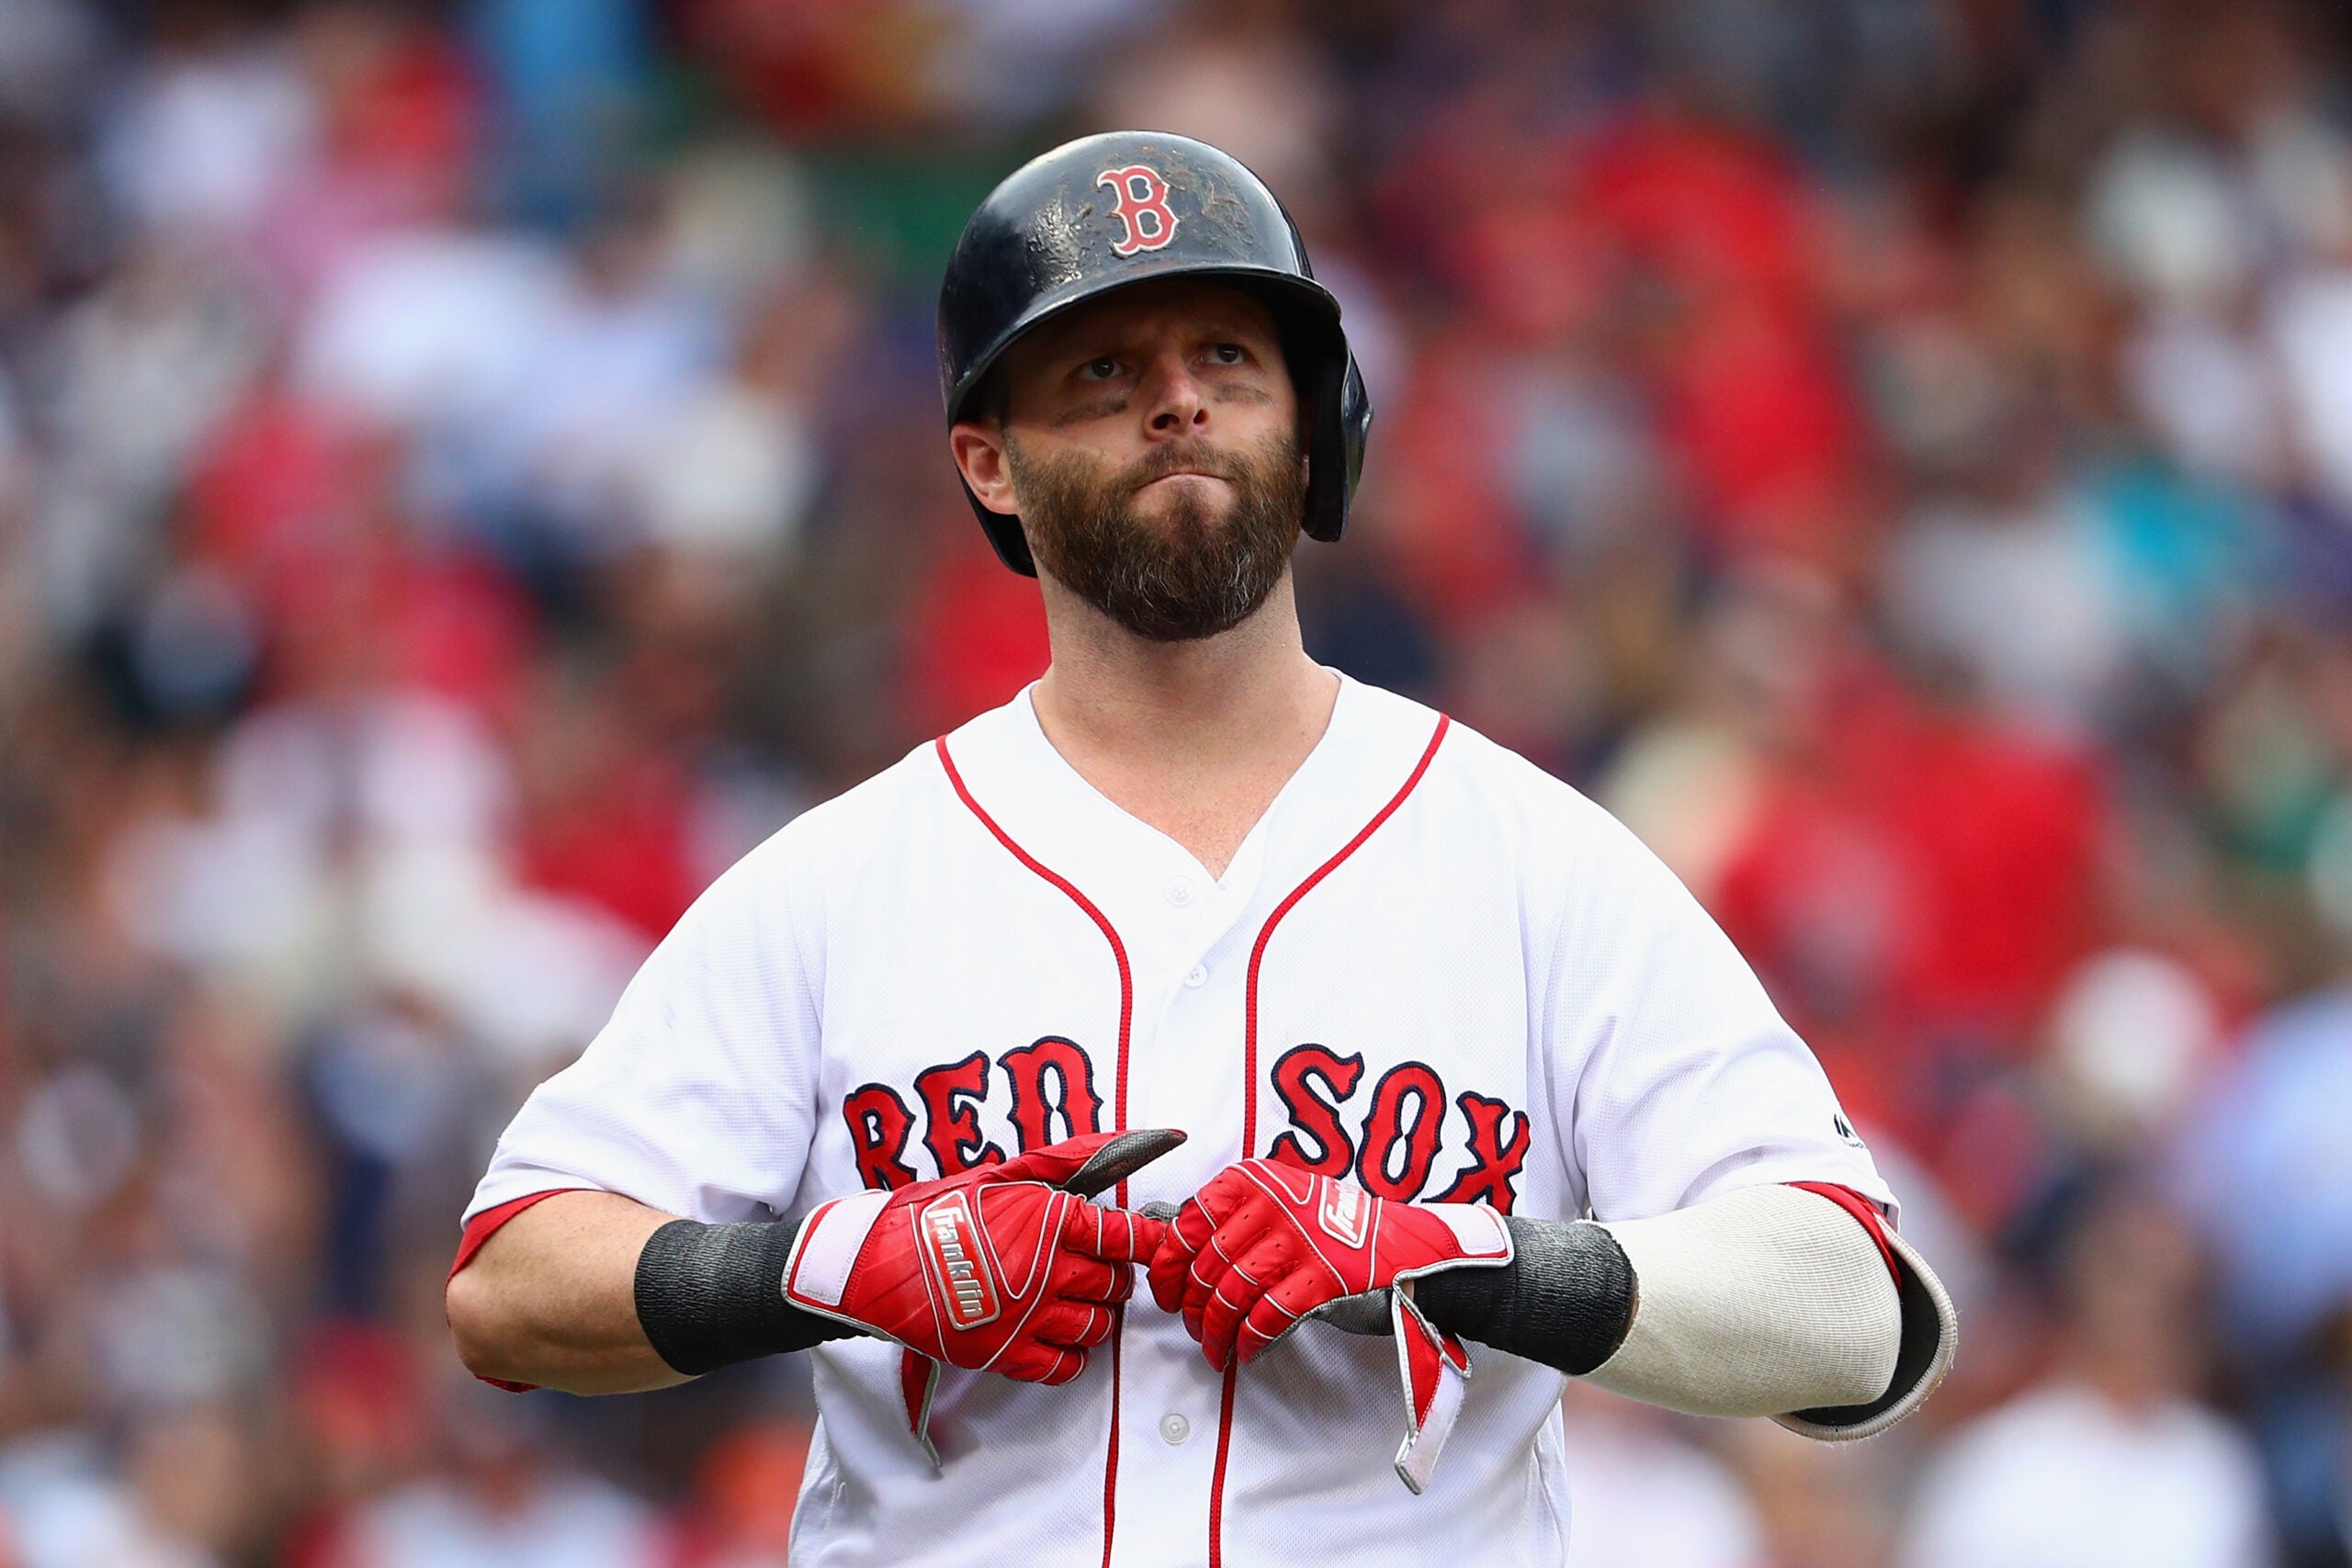 Dustin Pedroia's top moments